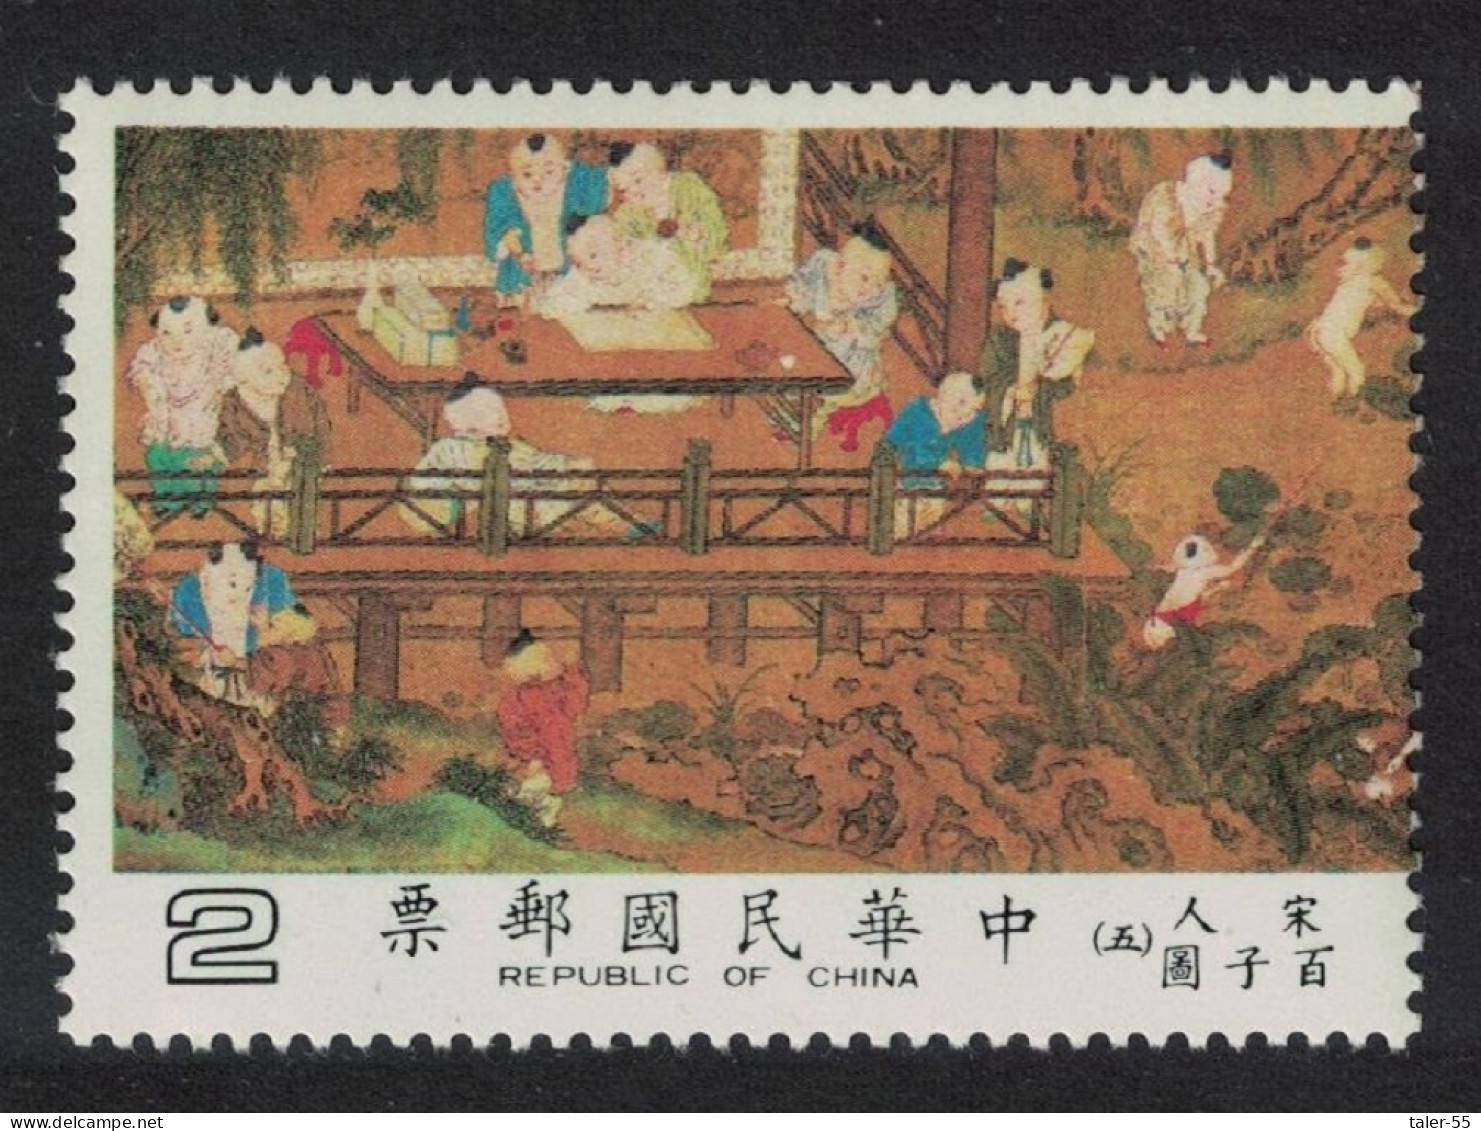 Taiwan Drawing Painting 'One Hundred Young Boys' $2 1981 MNH SG#1403 MI#1436 - Neufs